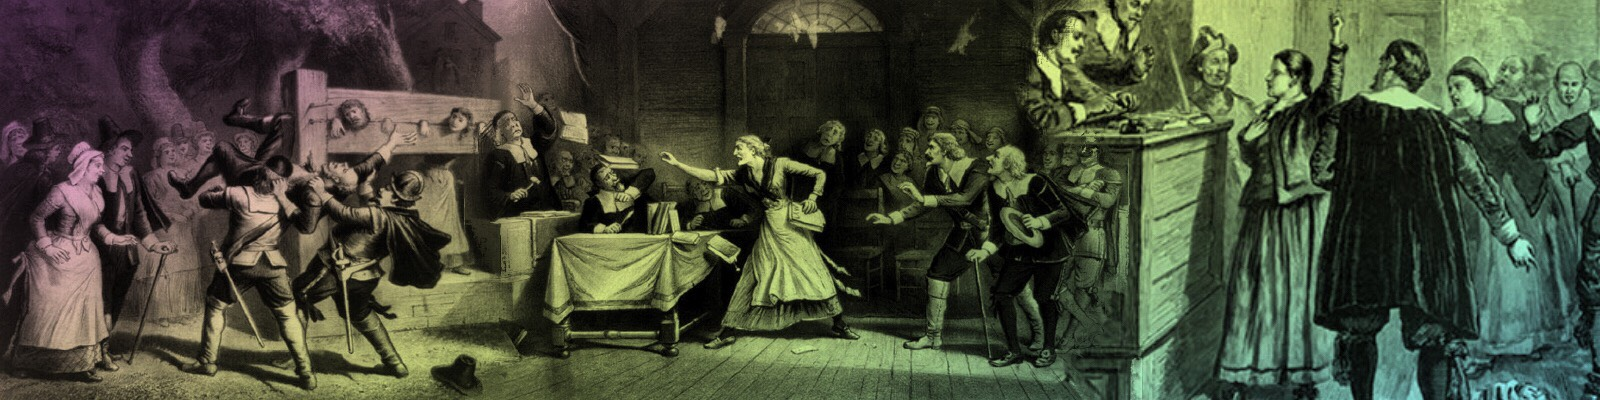 Significance of salem witch trials